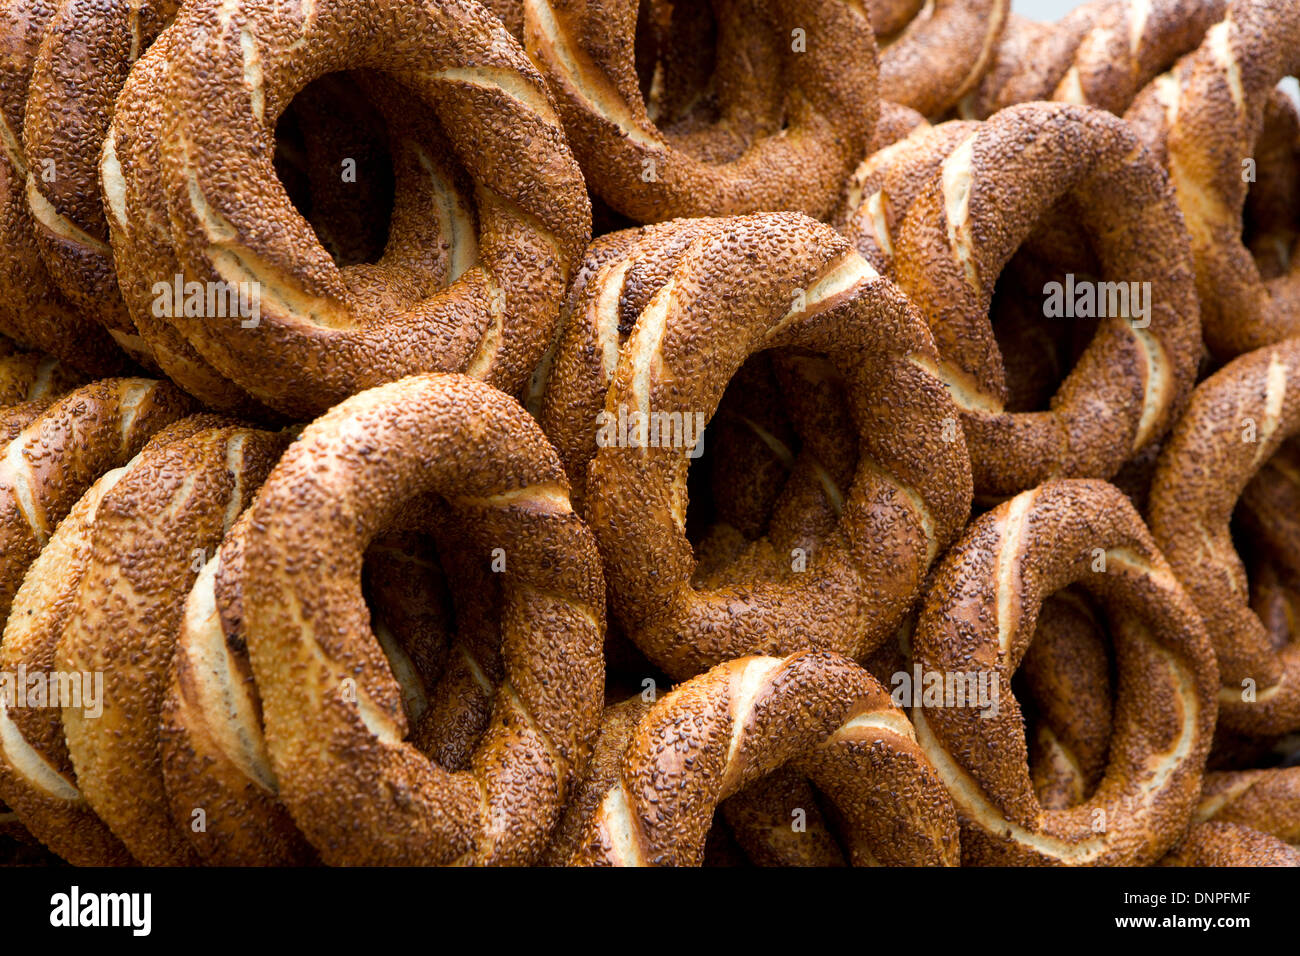 A close up image of a Simit Bread vending trolley that are so popular in Istanbul, Turkey. Stock Photo